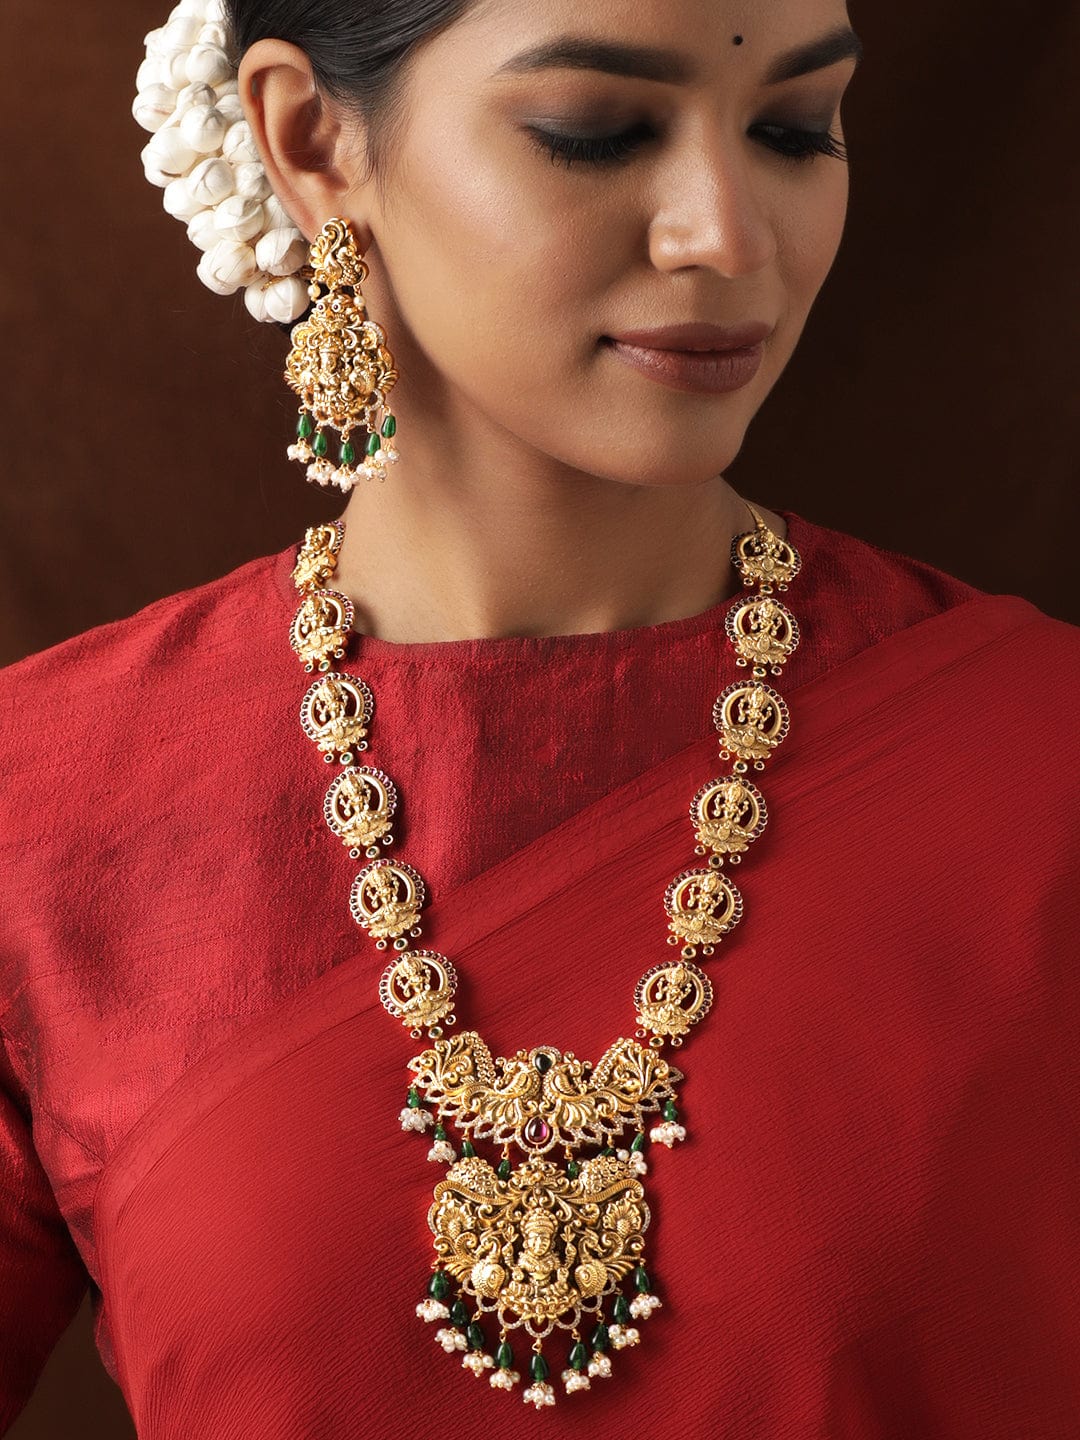 Rubans 22K Gold plated Kemp Red & Green Stone, Handcrafted Pearl beaded Temple Necklace Set Jewellery Sets